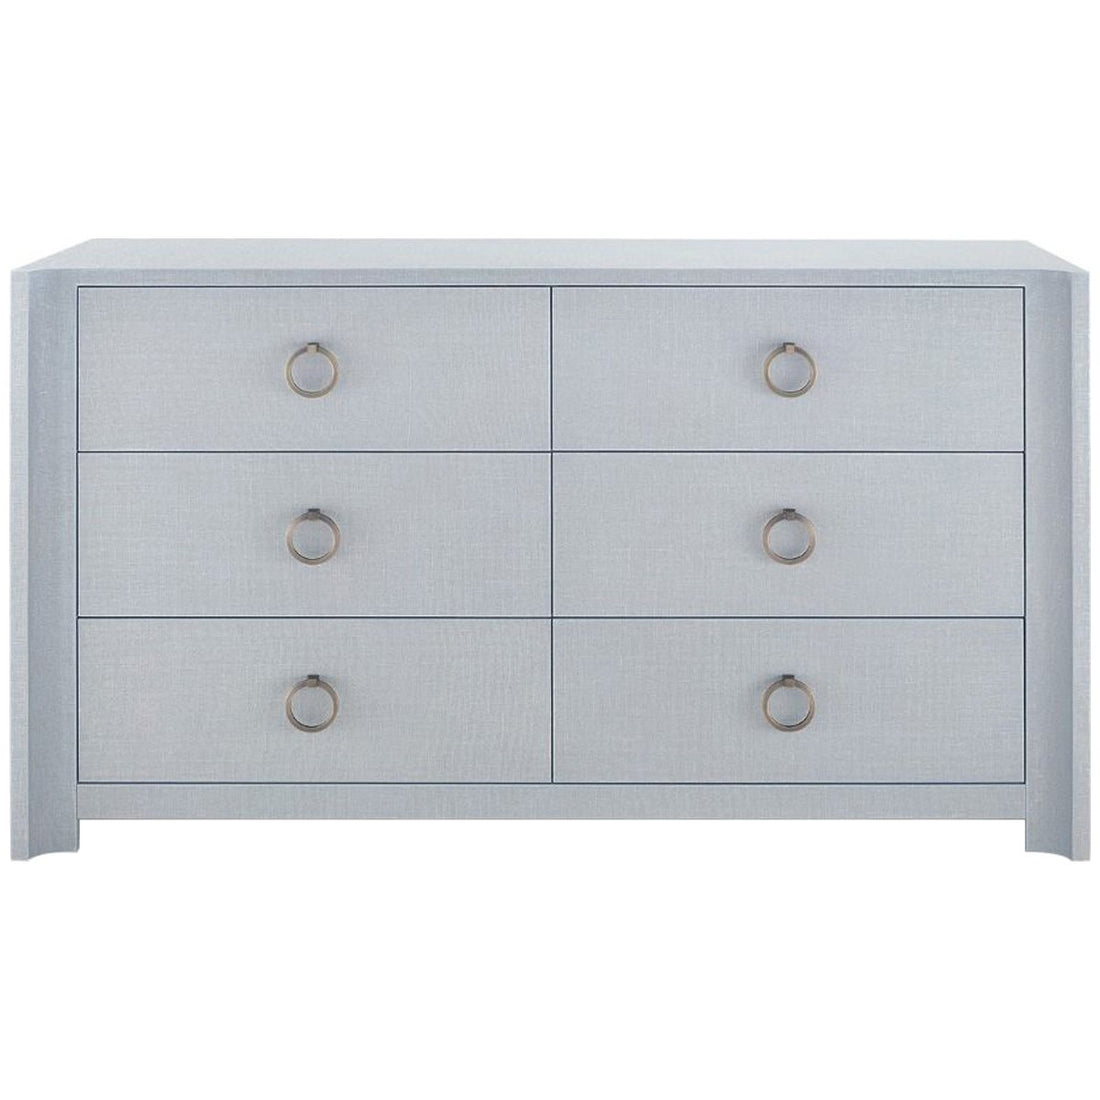 Villa & House Audrey Extra Large 6-Drawer Dresser with Owen Pull